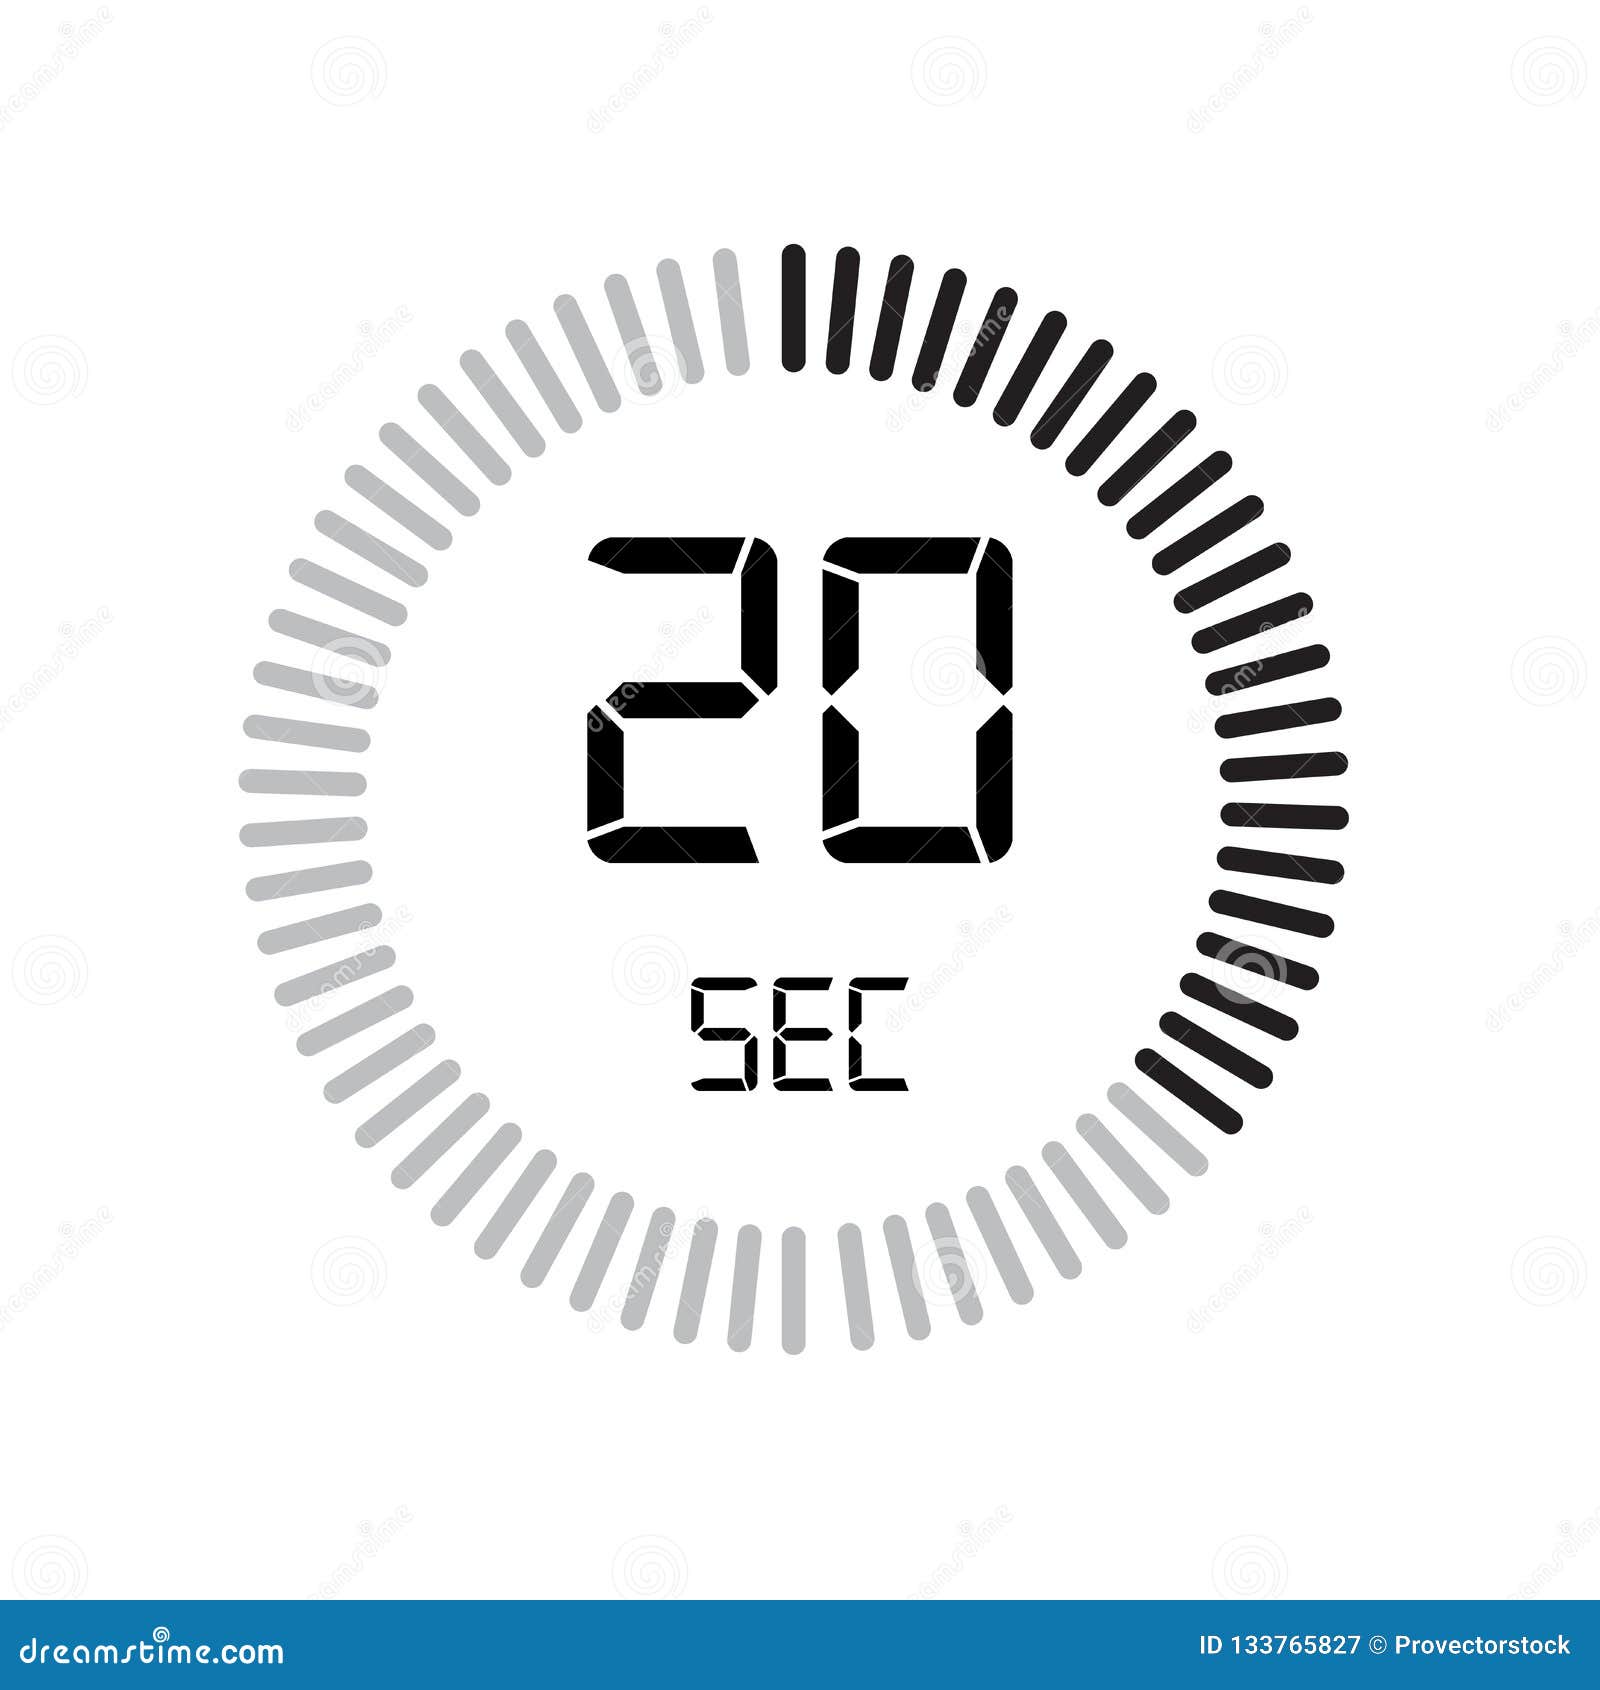 Seconds Stock Illustrations 6925 Seconds Stock Illustrations